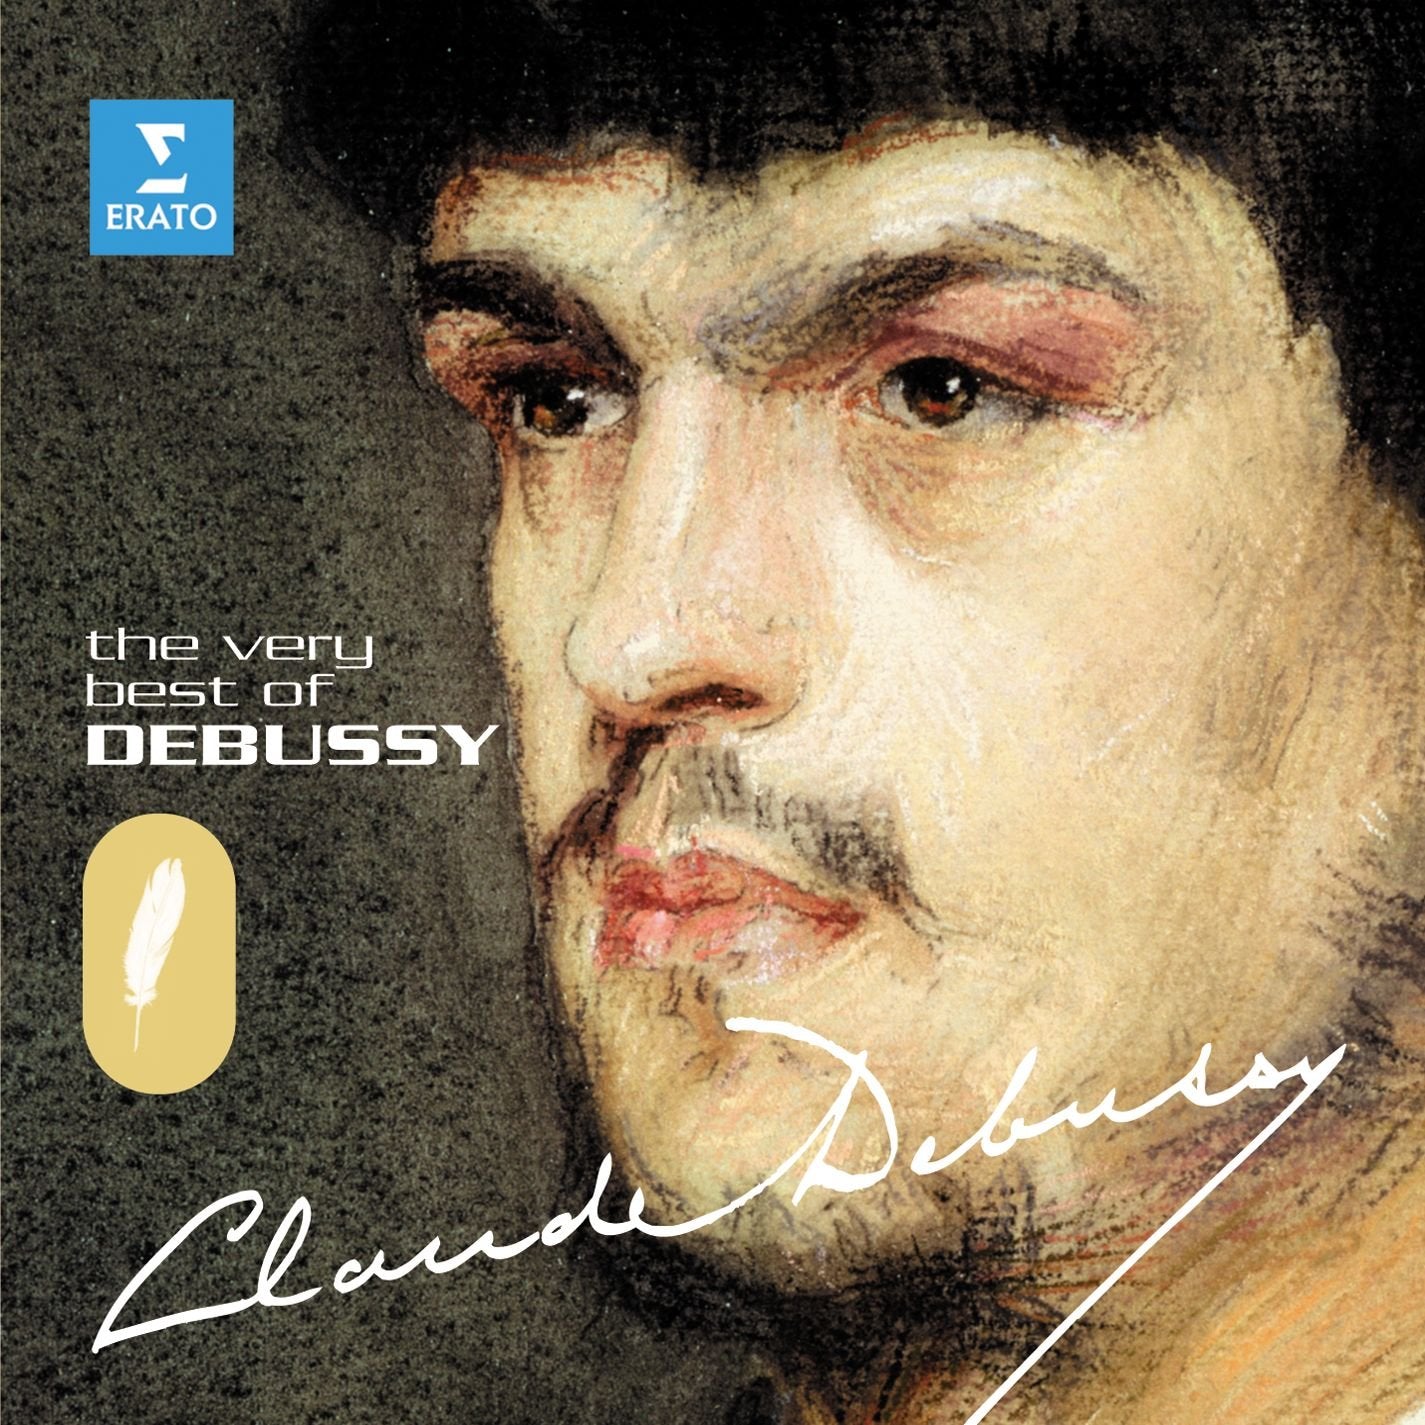 Debussy: The Very Best of Debussy (2 CDs)